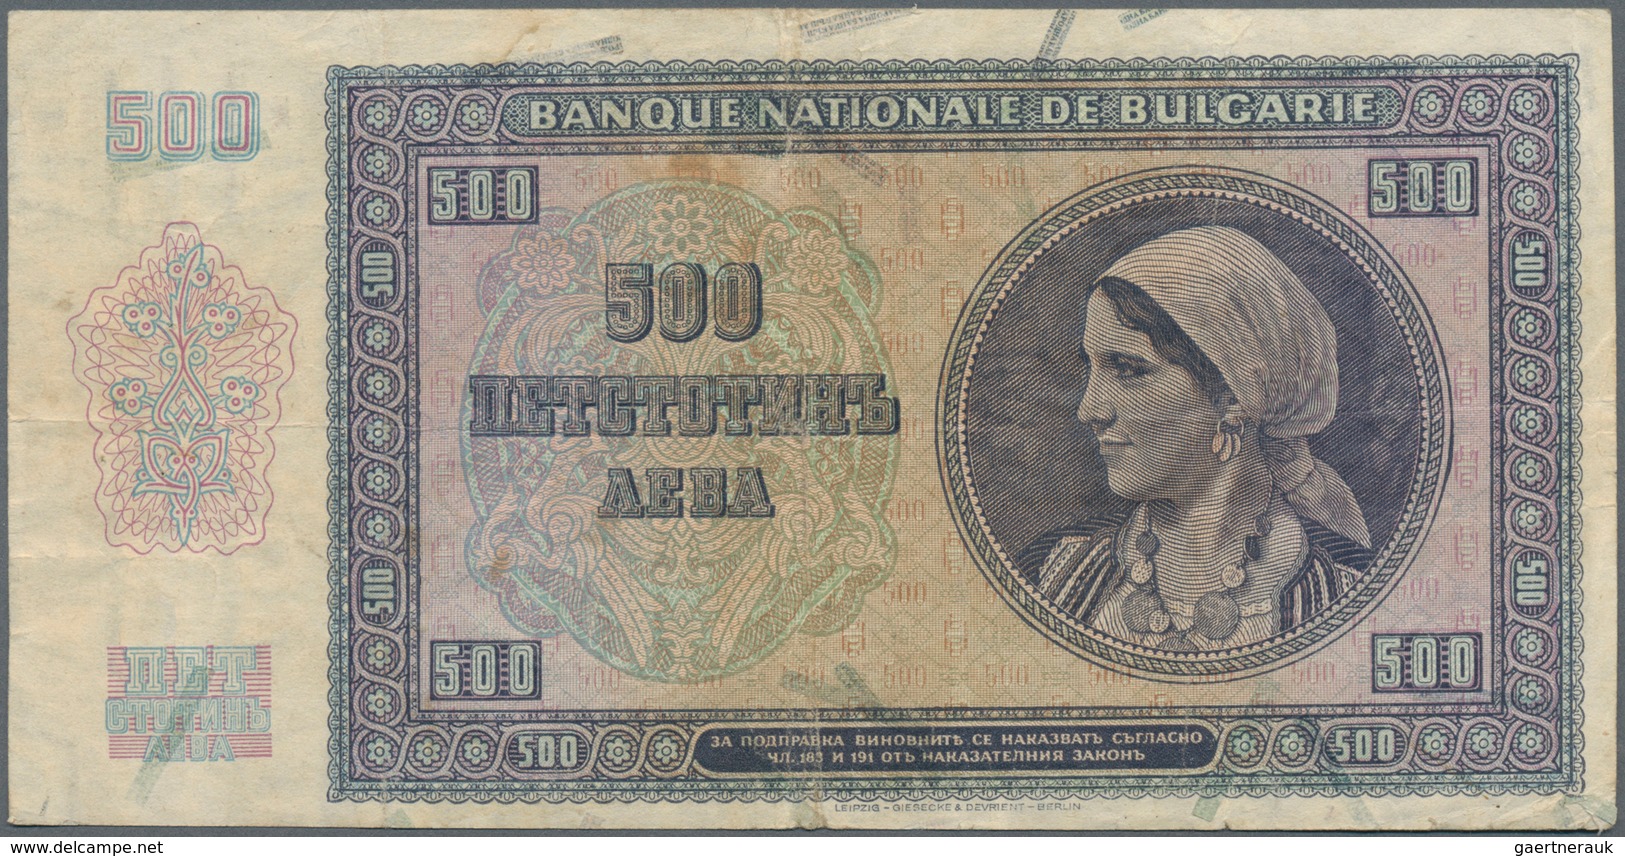 Bulgaria / Bulgarien: Nice Lot With 3 Banknotes 500 And 1000 Leva 1942, P.60, 61 (F+, VF+) And 20 Le - Bulgarie